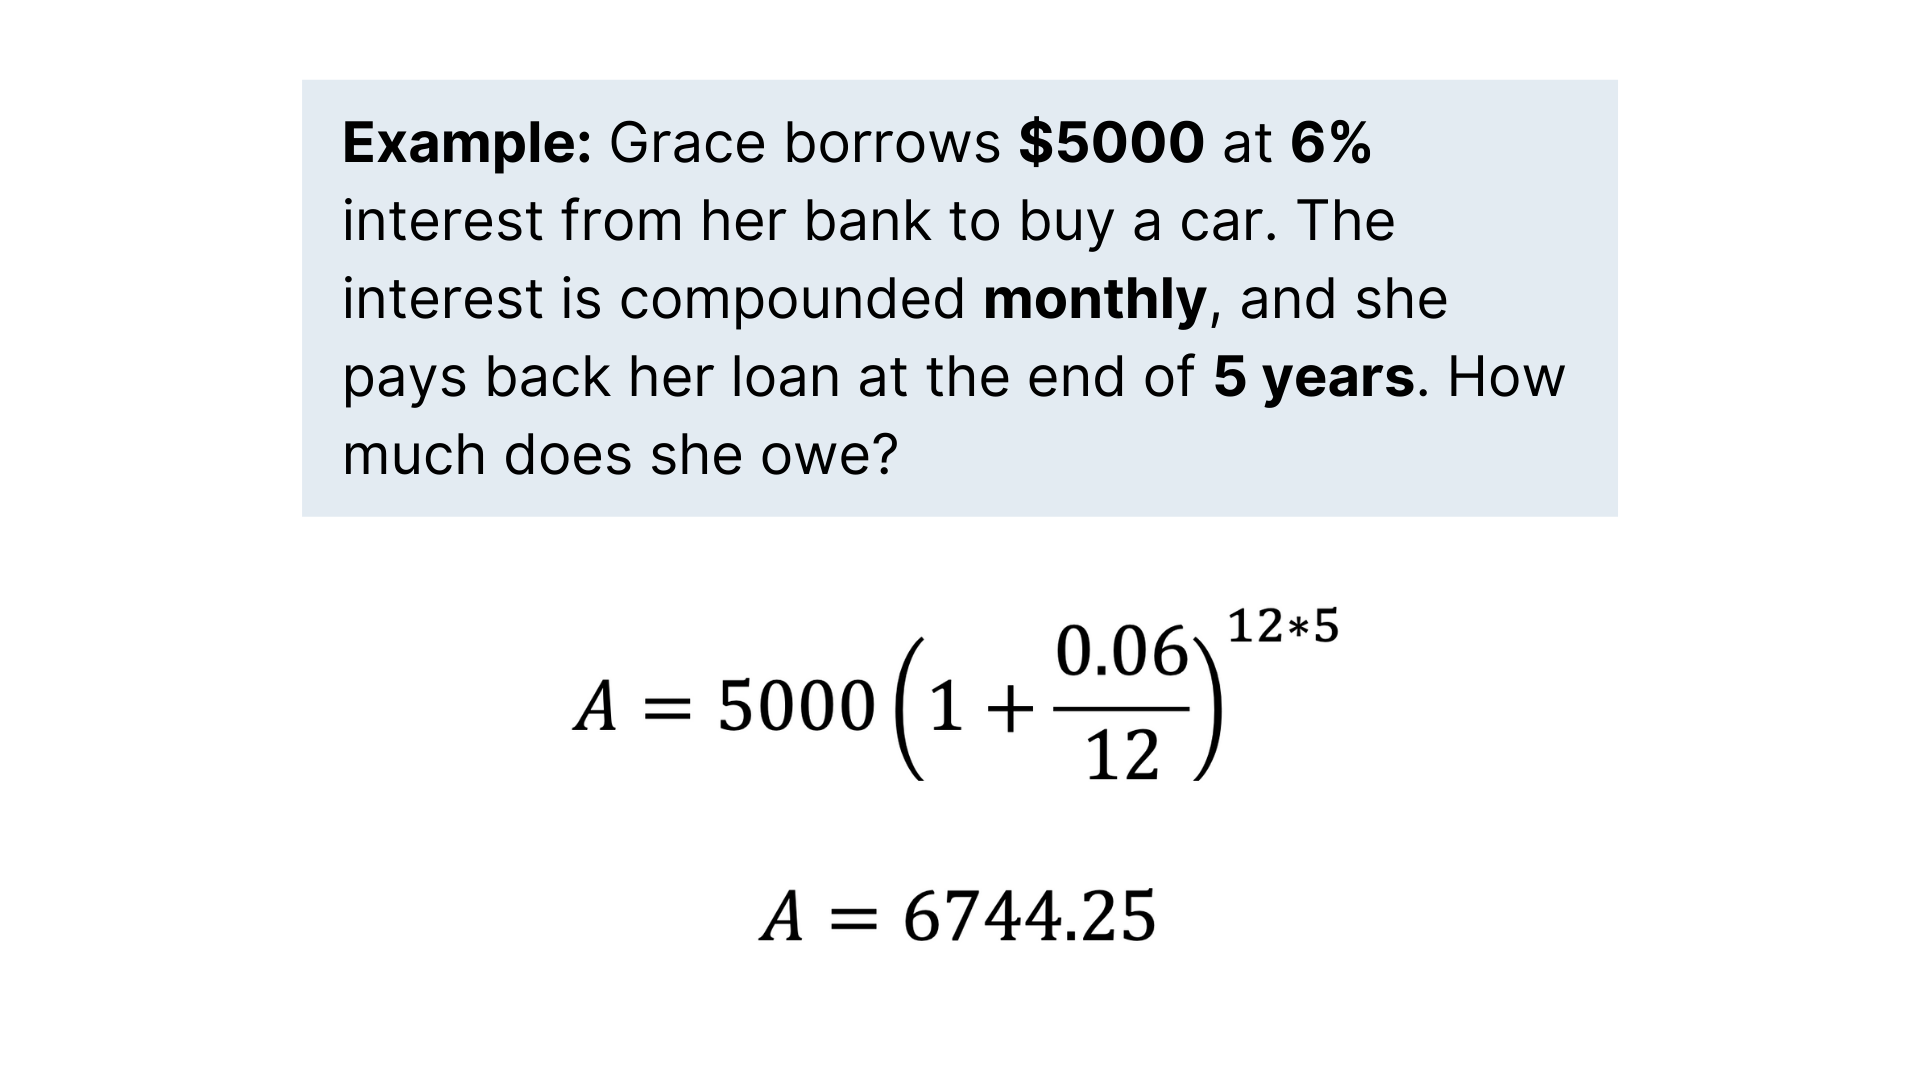 An example of a compound interest problem